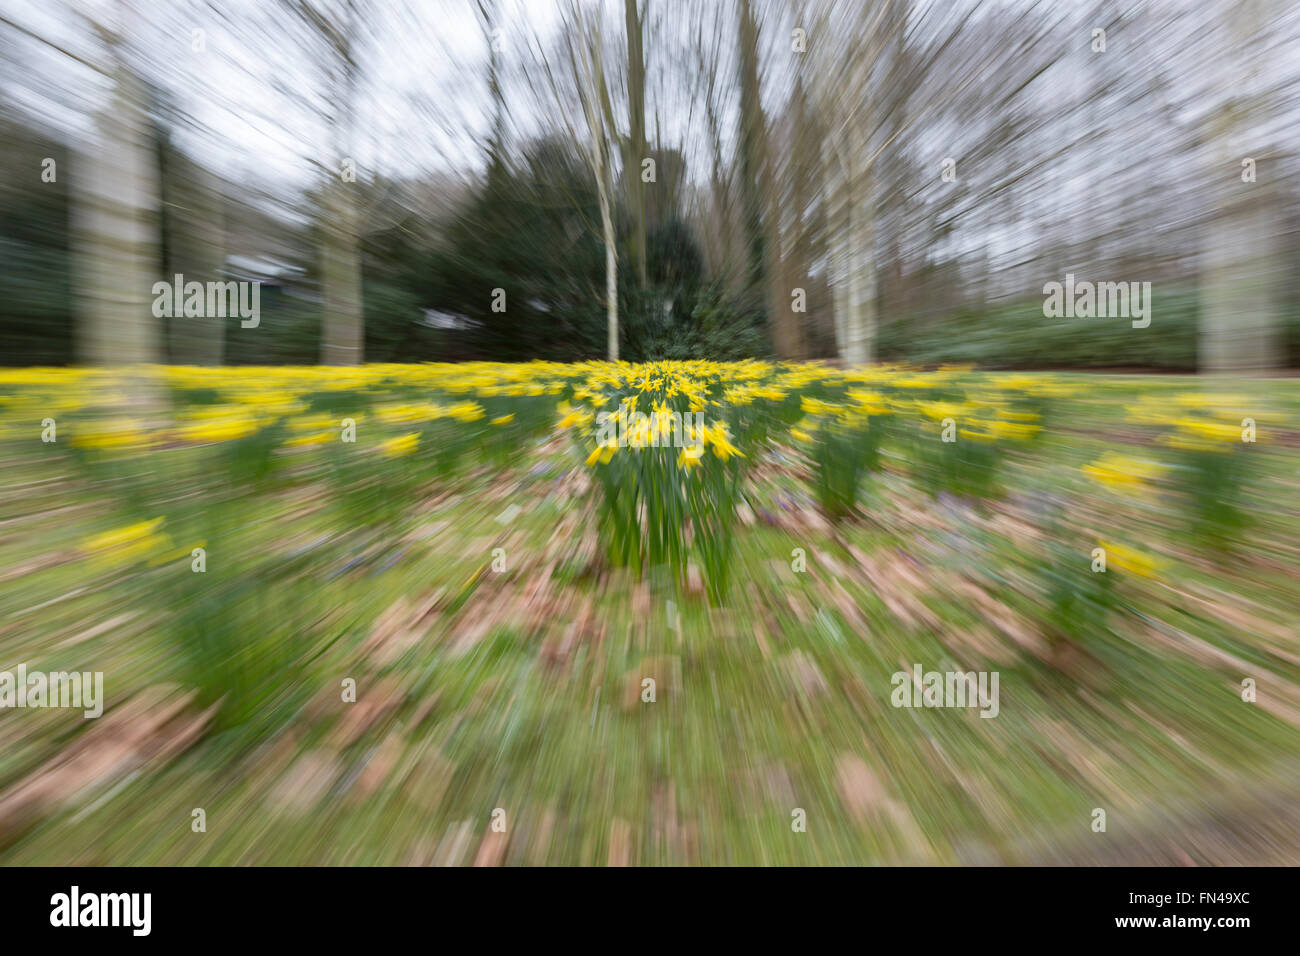 Field of daffodils blurred with camera zoom Stock Photo